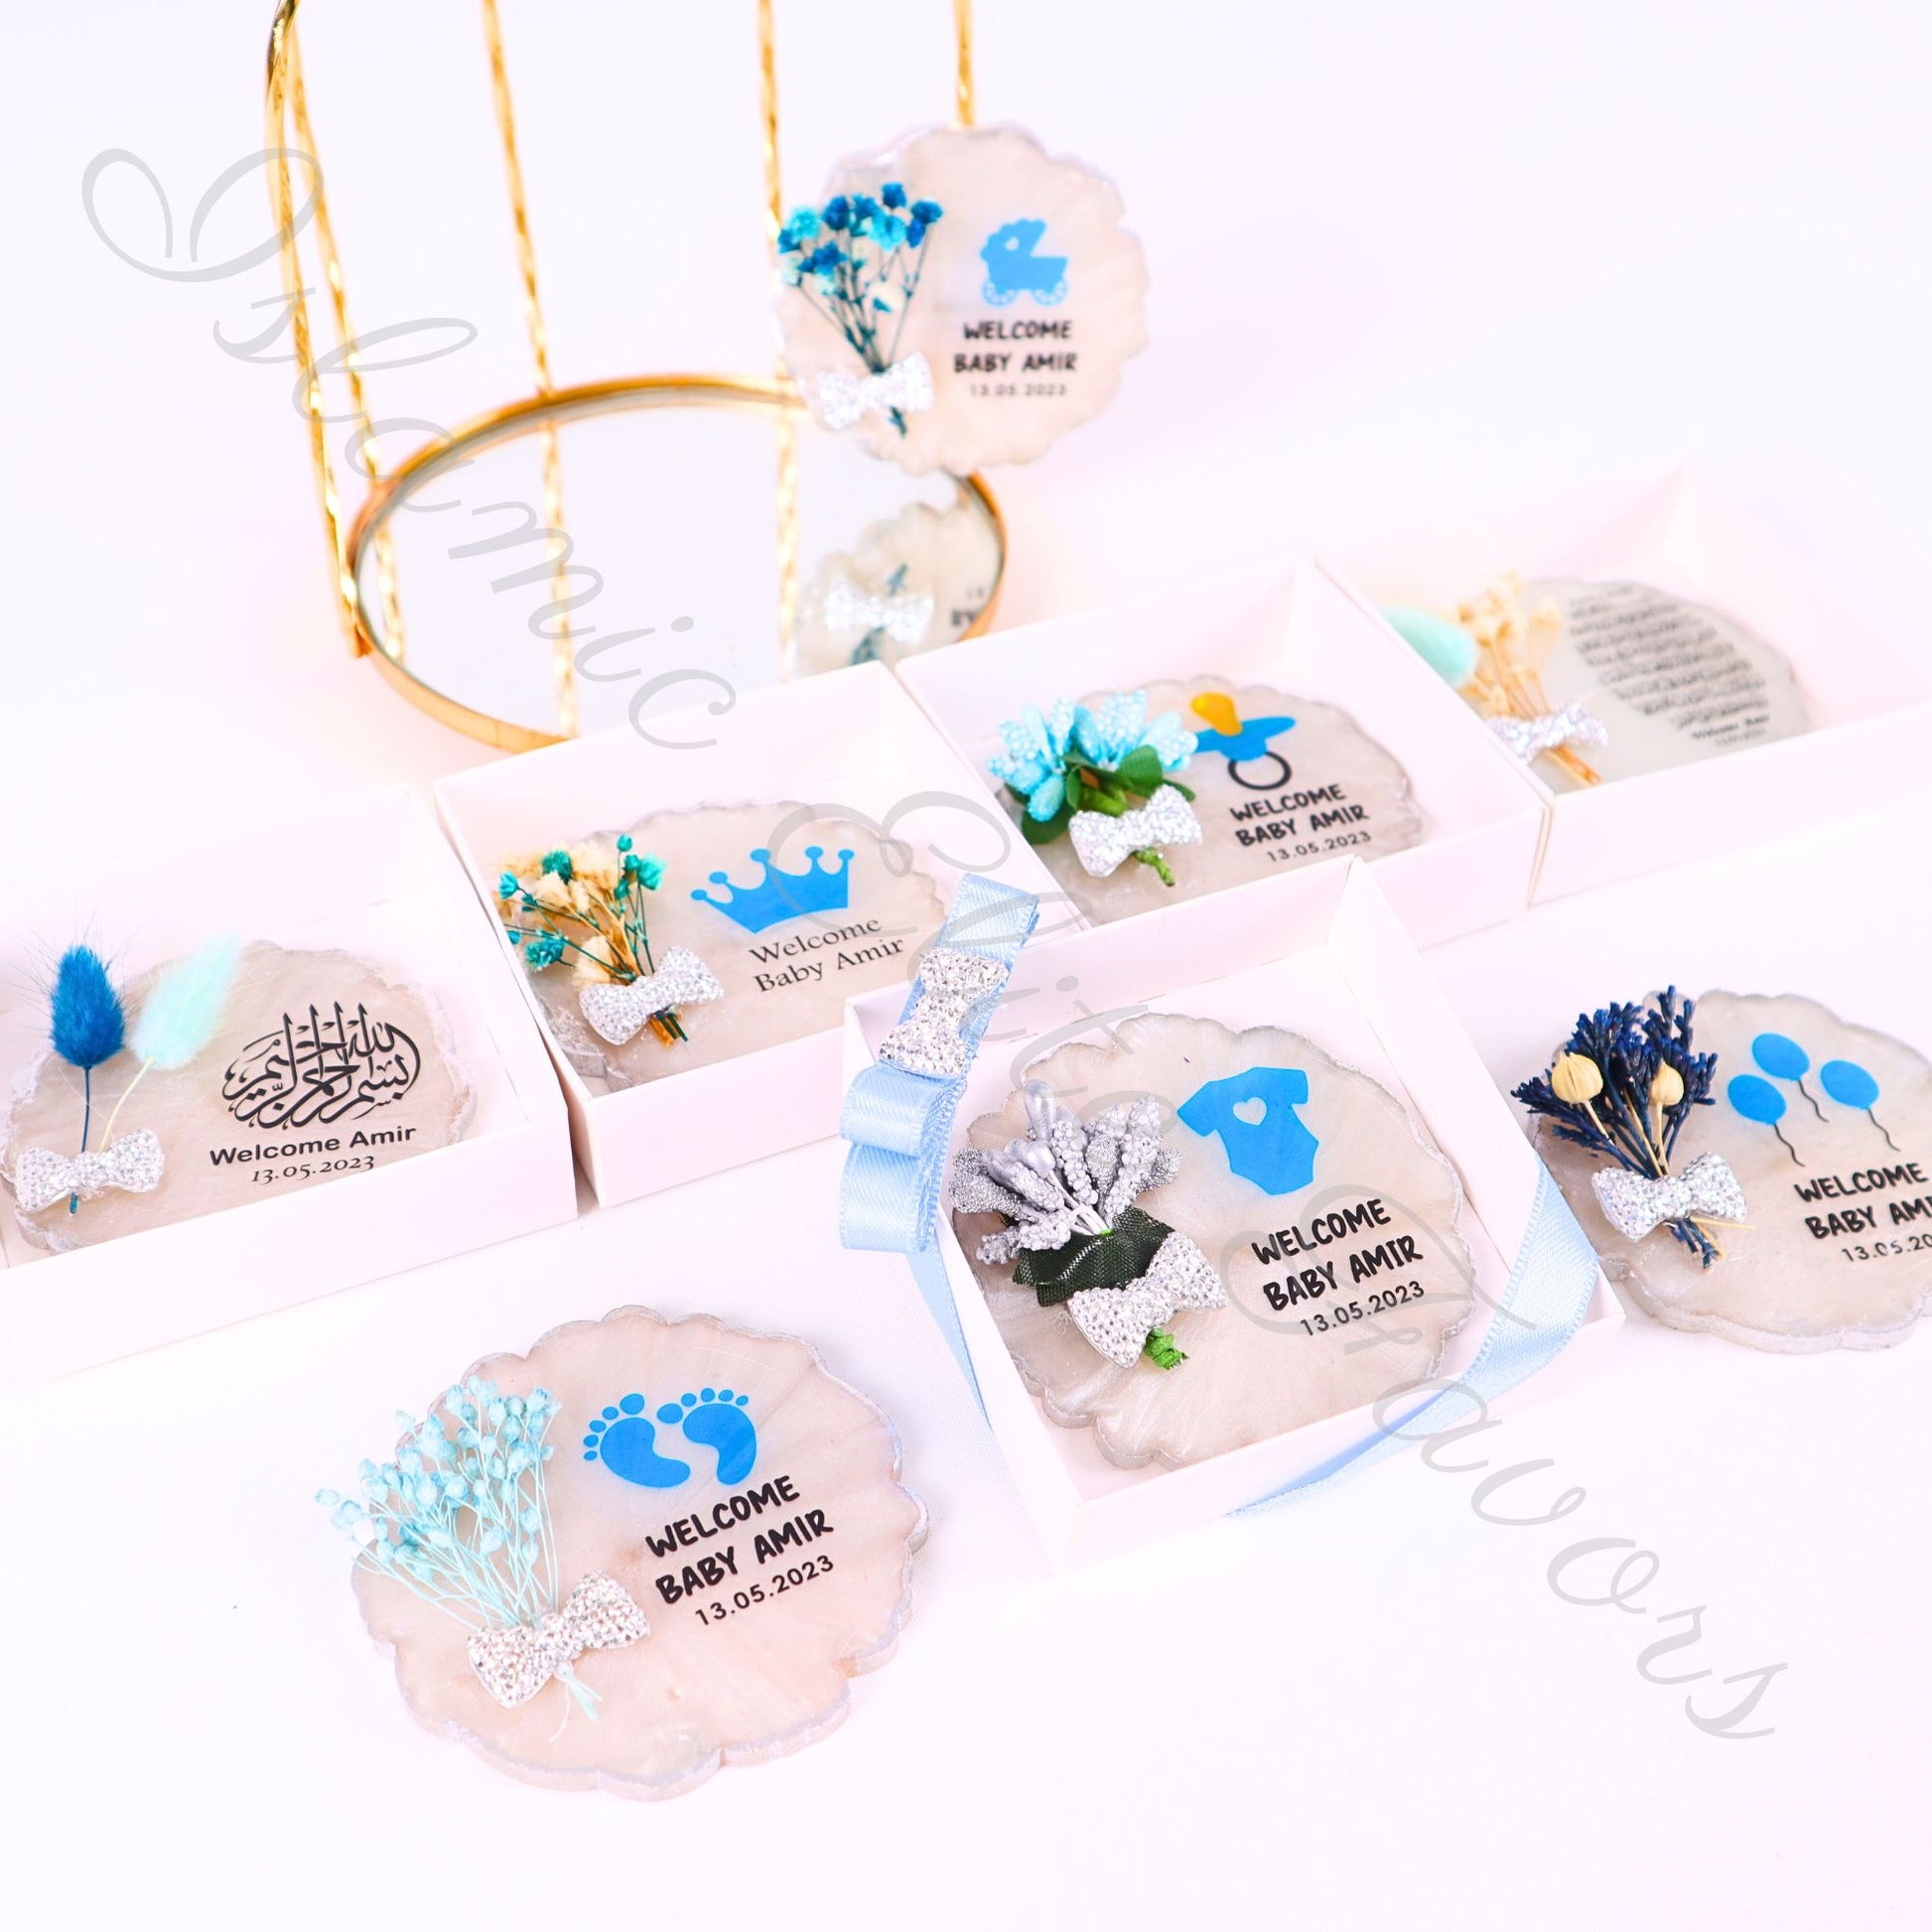 Personalized Baby Shower Favors Epoxy Magnet for Baby Boy White Theme - Islamic Elite Favors is a handmade gift shop offering a wide variety of unique and personalized gifts for all occasions. Whether you're looking for the perfect Ramadan, Eid, Hajj, wedding gift or something special for a birthday, baby shower or anniversary, we have something for everyone. High quality, made with love.